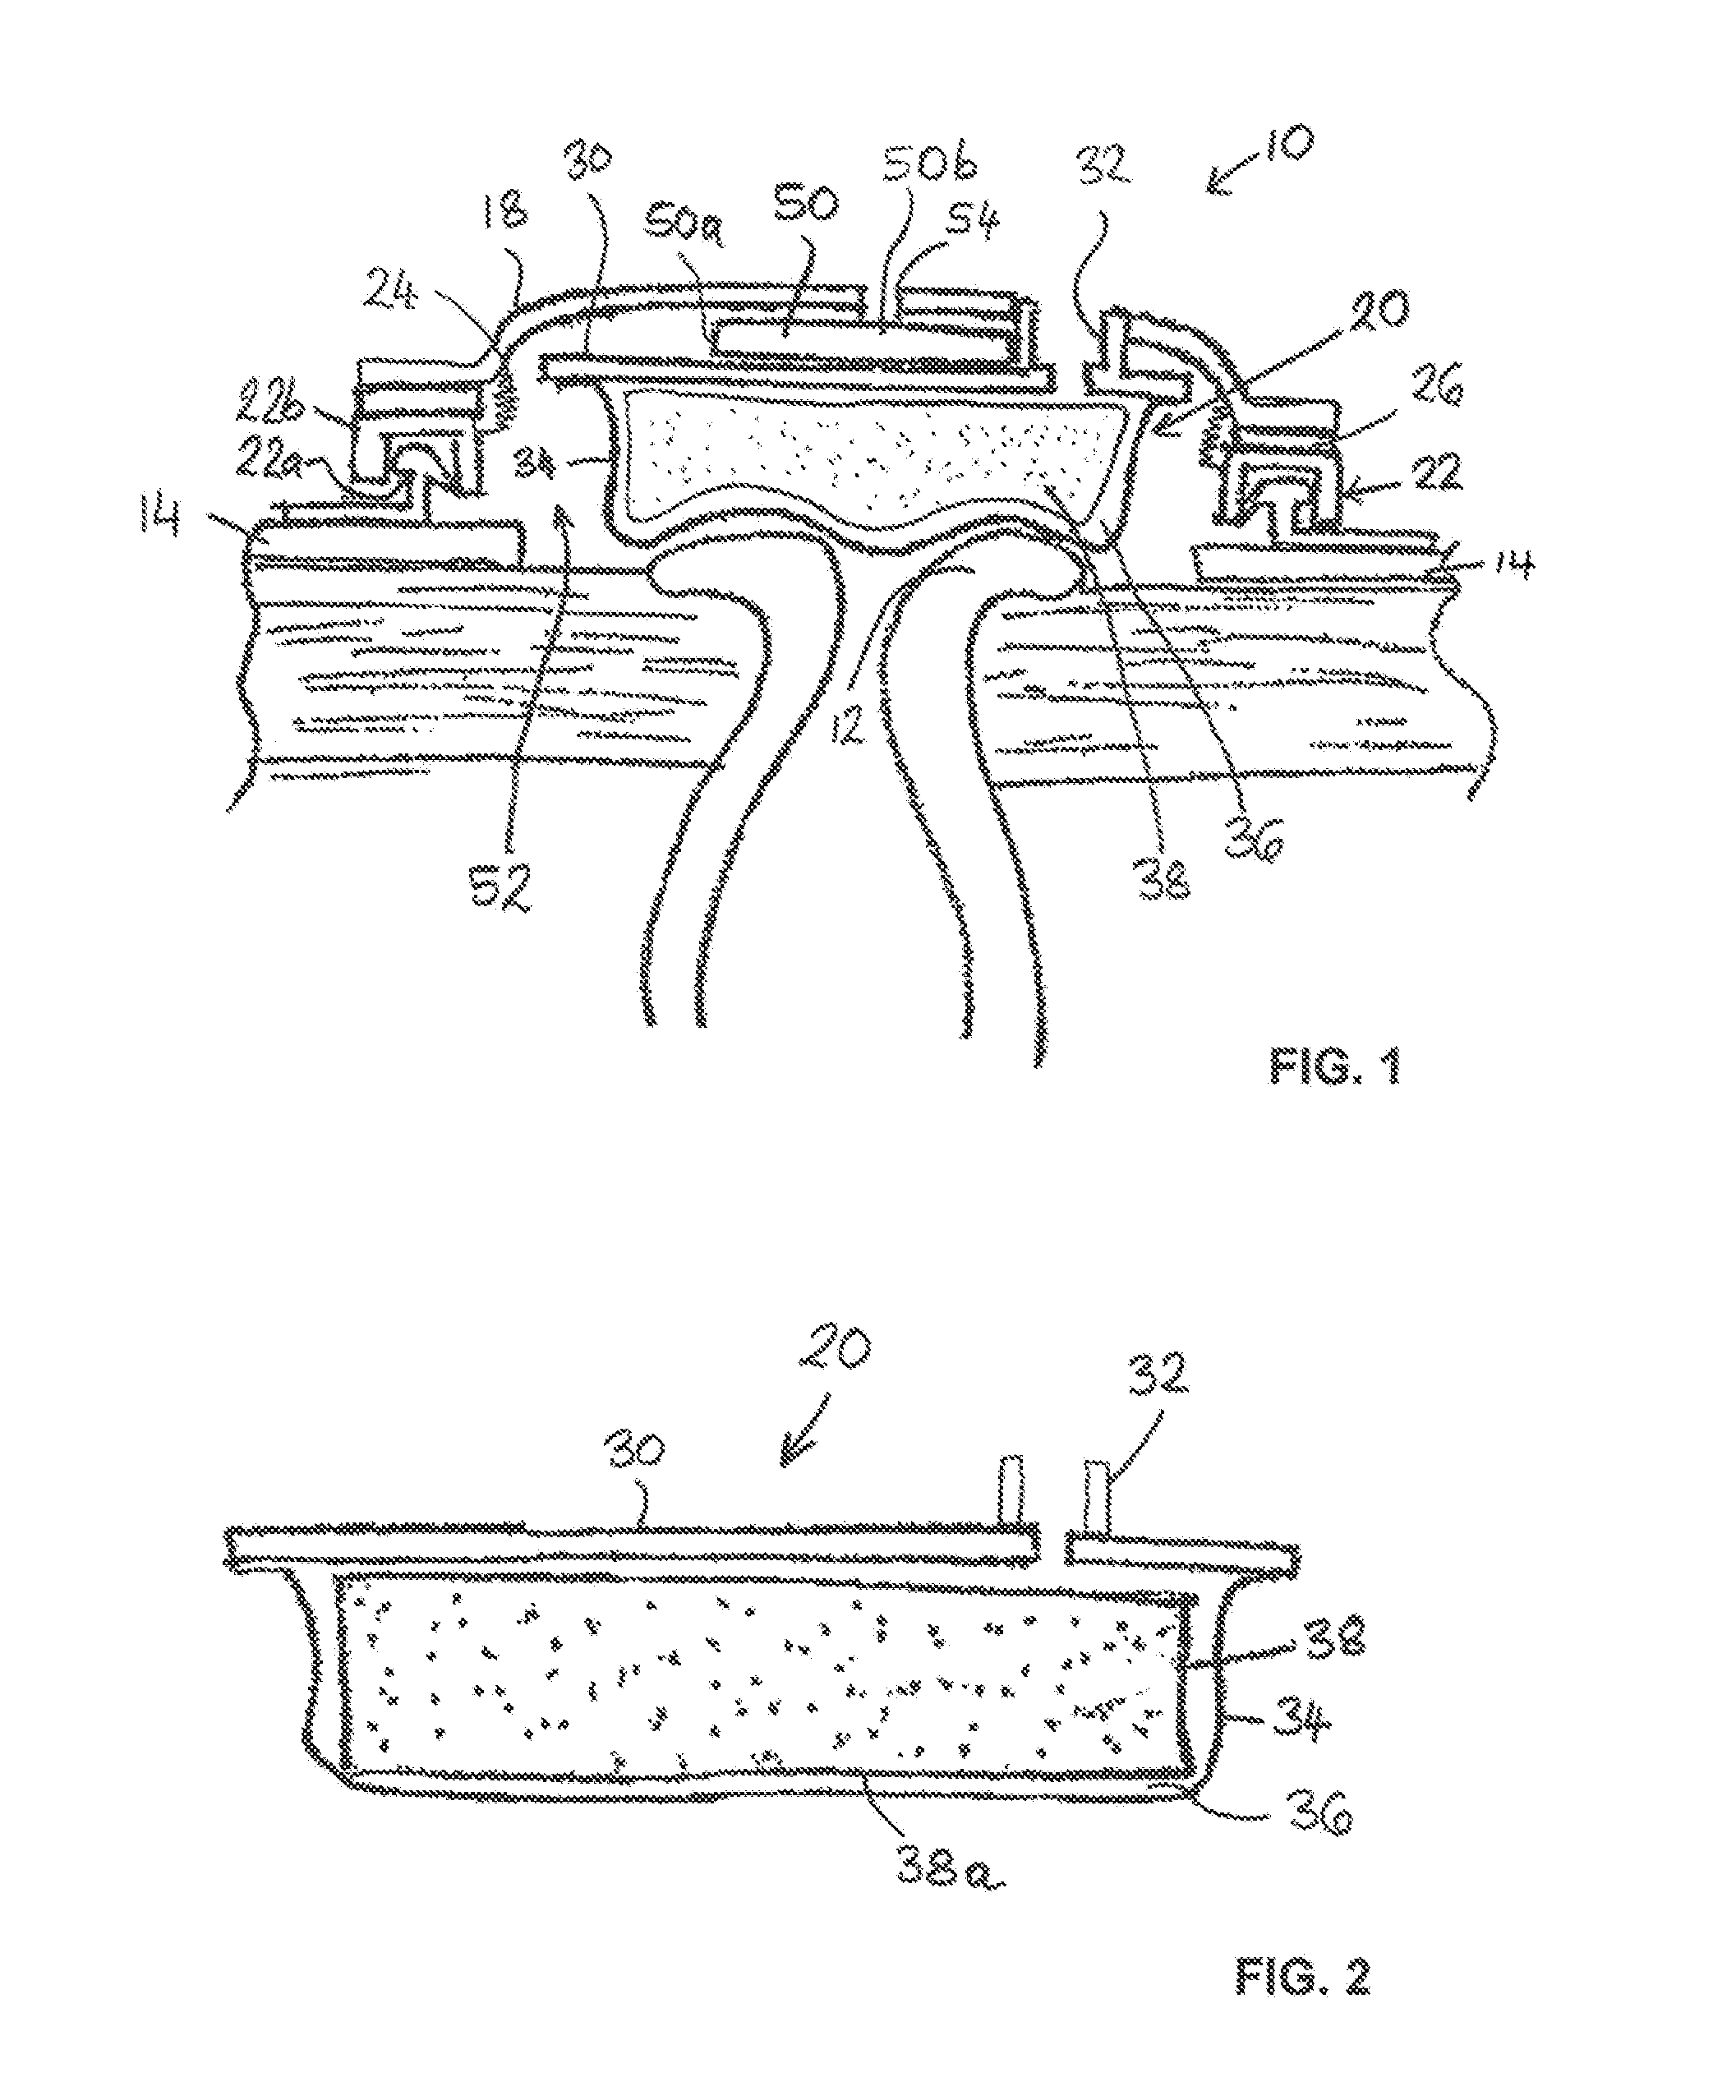 Fluid filled seal for contacting the human body